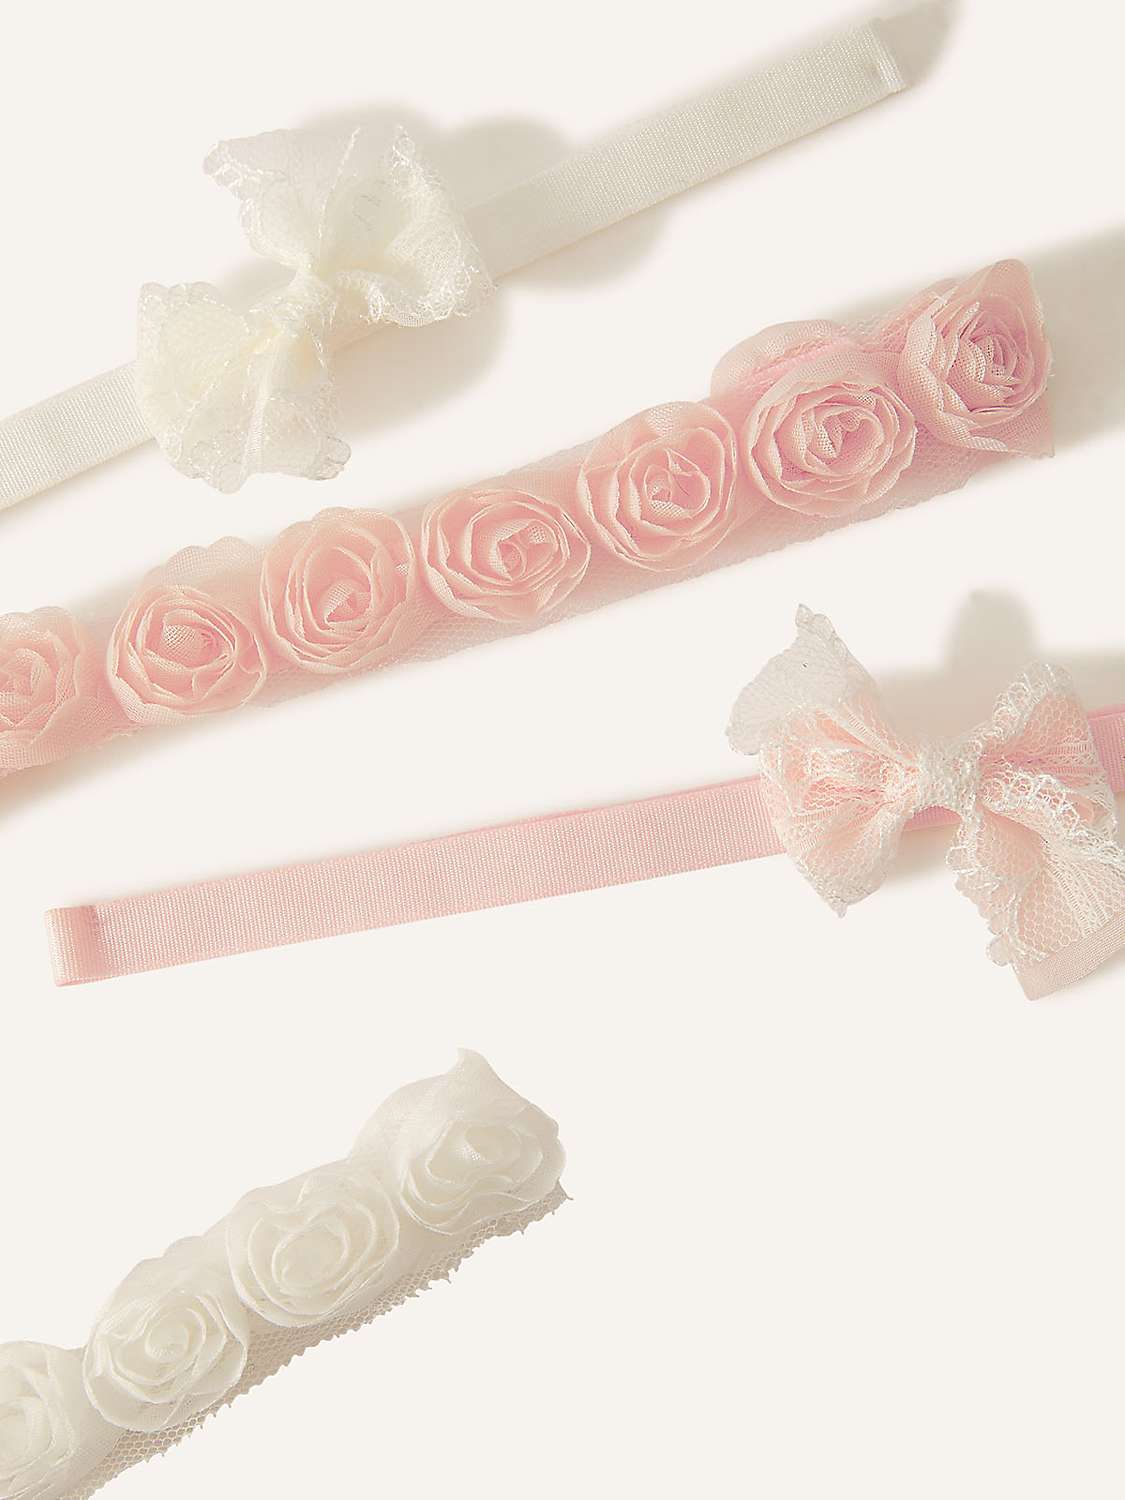 Buy Monsoon Baby Rose & Bow Headbands, Pack of 4, Ivory/Pink Online at johnlewis.com